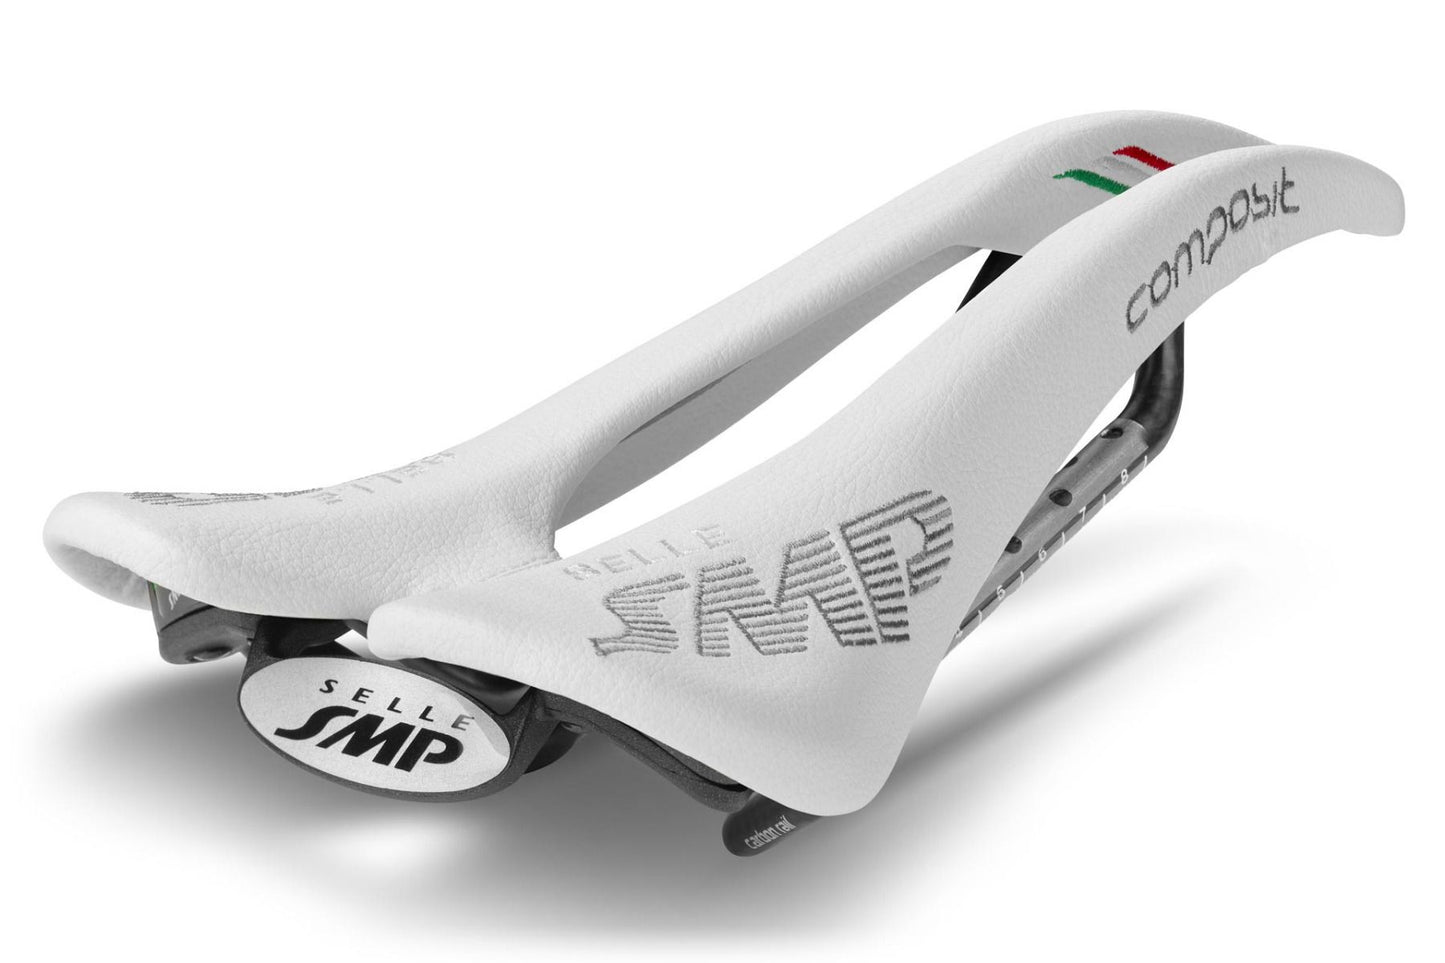 Selle SMP Composit Saddle with Carbon Rails (White)